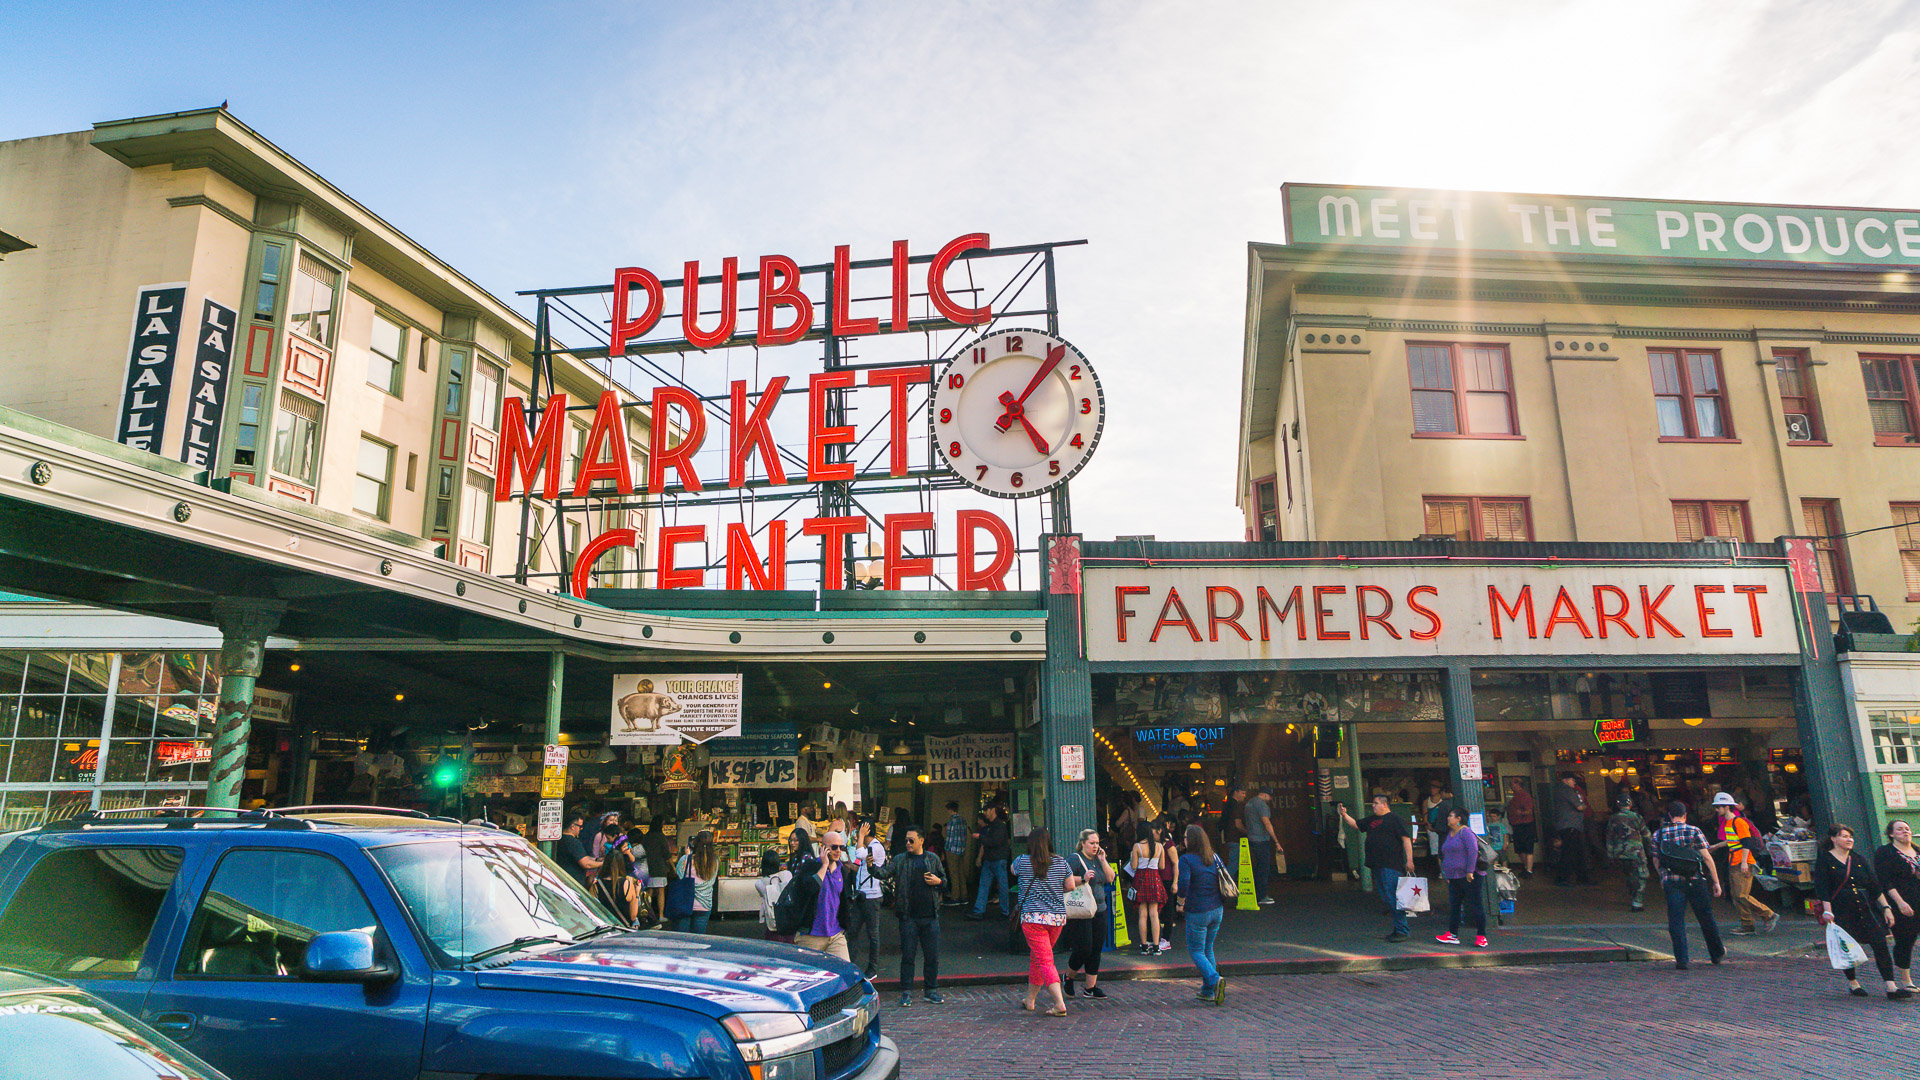 <ul> <li>Cheapest time to fly: April</li> <li>Where to find affordable lodging: Downtown Seattle, Queen Anne</li> <li>Where to find cheap eats: Pike Place Chowder, Piroshky Piroshky</li> <li>Free or affordable entertainment: Pike Place Market, Frye Art Museum</li> </ul> <p>Round-trip flights for $318 on average make January the cheapest time to visit Seattle. The Queen Anne Neighborhood offers an abundance of quality accommodations at budget rates -- as low as $579 for four nights -- though you can find cheap hotels nearby in Downtown Seattle as well.</p> <p>Strolling through Pike Place Market, Seattle's original farmers market established in 1907, is one of the best free things to do in the city. And art lovers will be tickled to learn that admission to Seattle's Frye Art Museum is always free. </p> <p>Seattle offers some great seafood on a budget, such as Pike Place Chowder, where you can get a sampler platter of any four chowder varieties served with fresh homemade sourdough bread for $19.95. Also check out Piroshky Piroshky, a bakery selling Russian hand-pies where you can get a potato and cheese piroshky or a vegan chipotle piroshky for just $7.25.</p> <p><strong><em>Take Our Poll: <a href="https://www.gobankingrates.com/banking/banks/take-our-poll-are-you-concerned-about-the-safety-of-your-money-in-your-bank-accounts/?utm_term=incontent_link_3&utm_campaign=1228112&utm_source=msn.com&utm_content=7&utm_medium=rss">Are You Concerned About the Safety of Your Money in Your Bank Accounts?</a></em></strong></p>